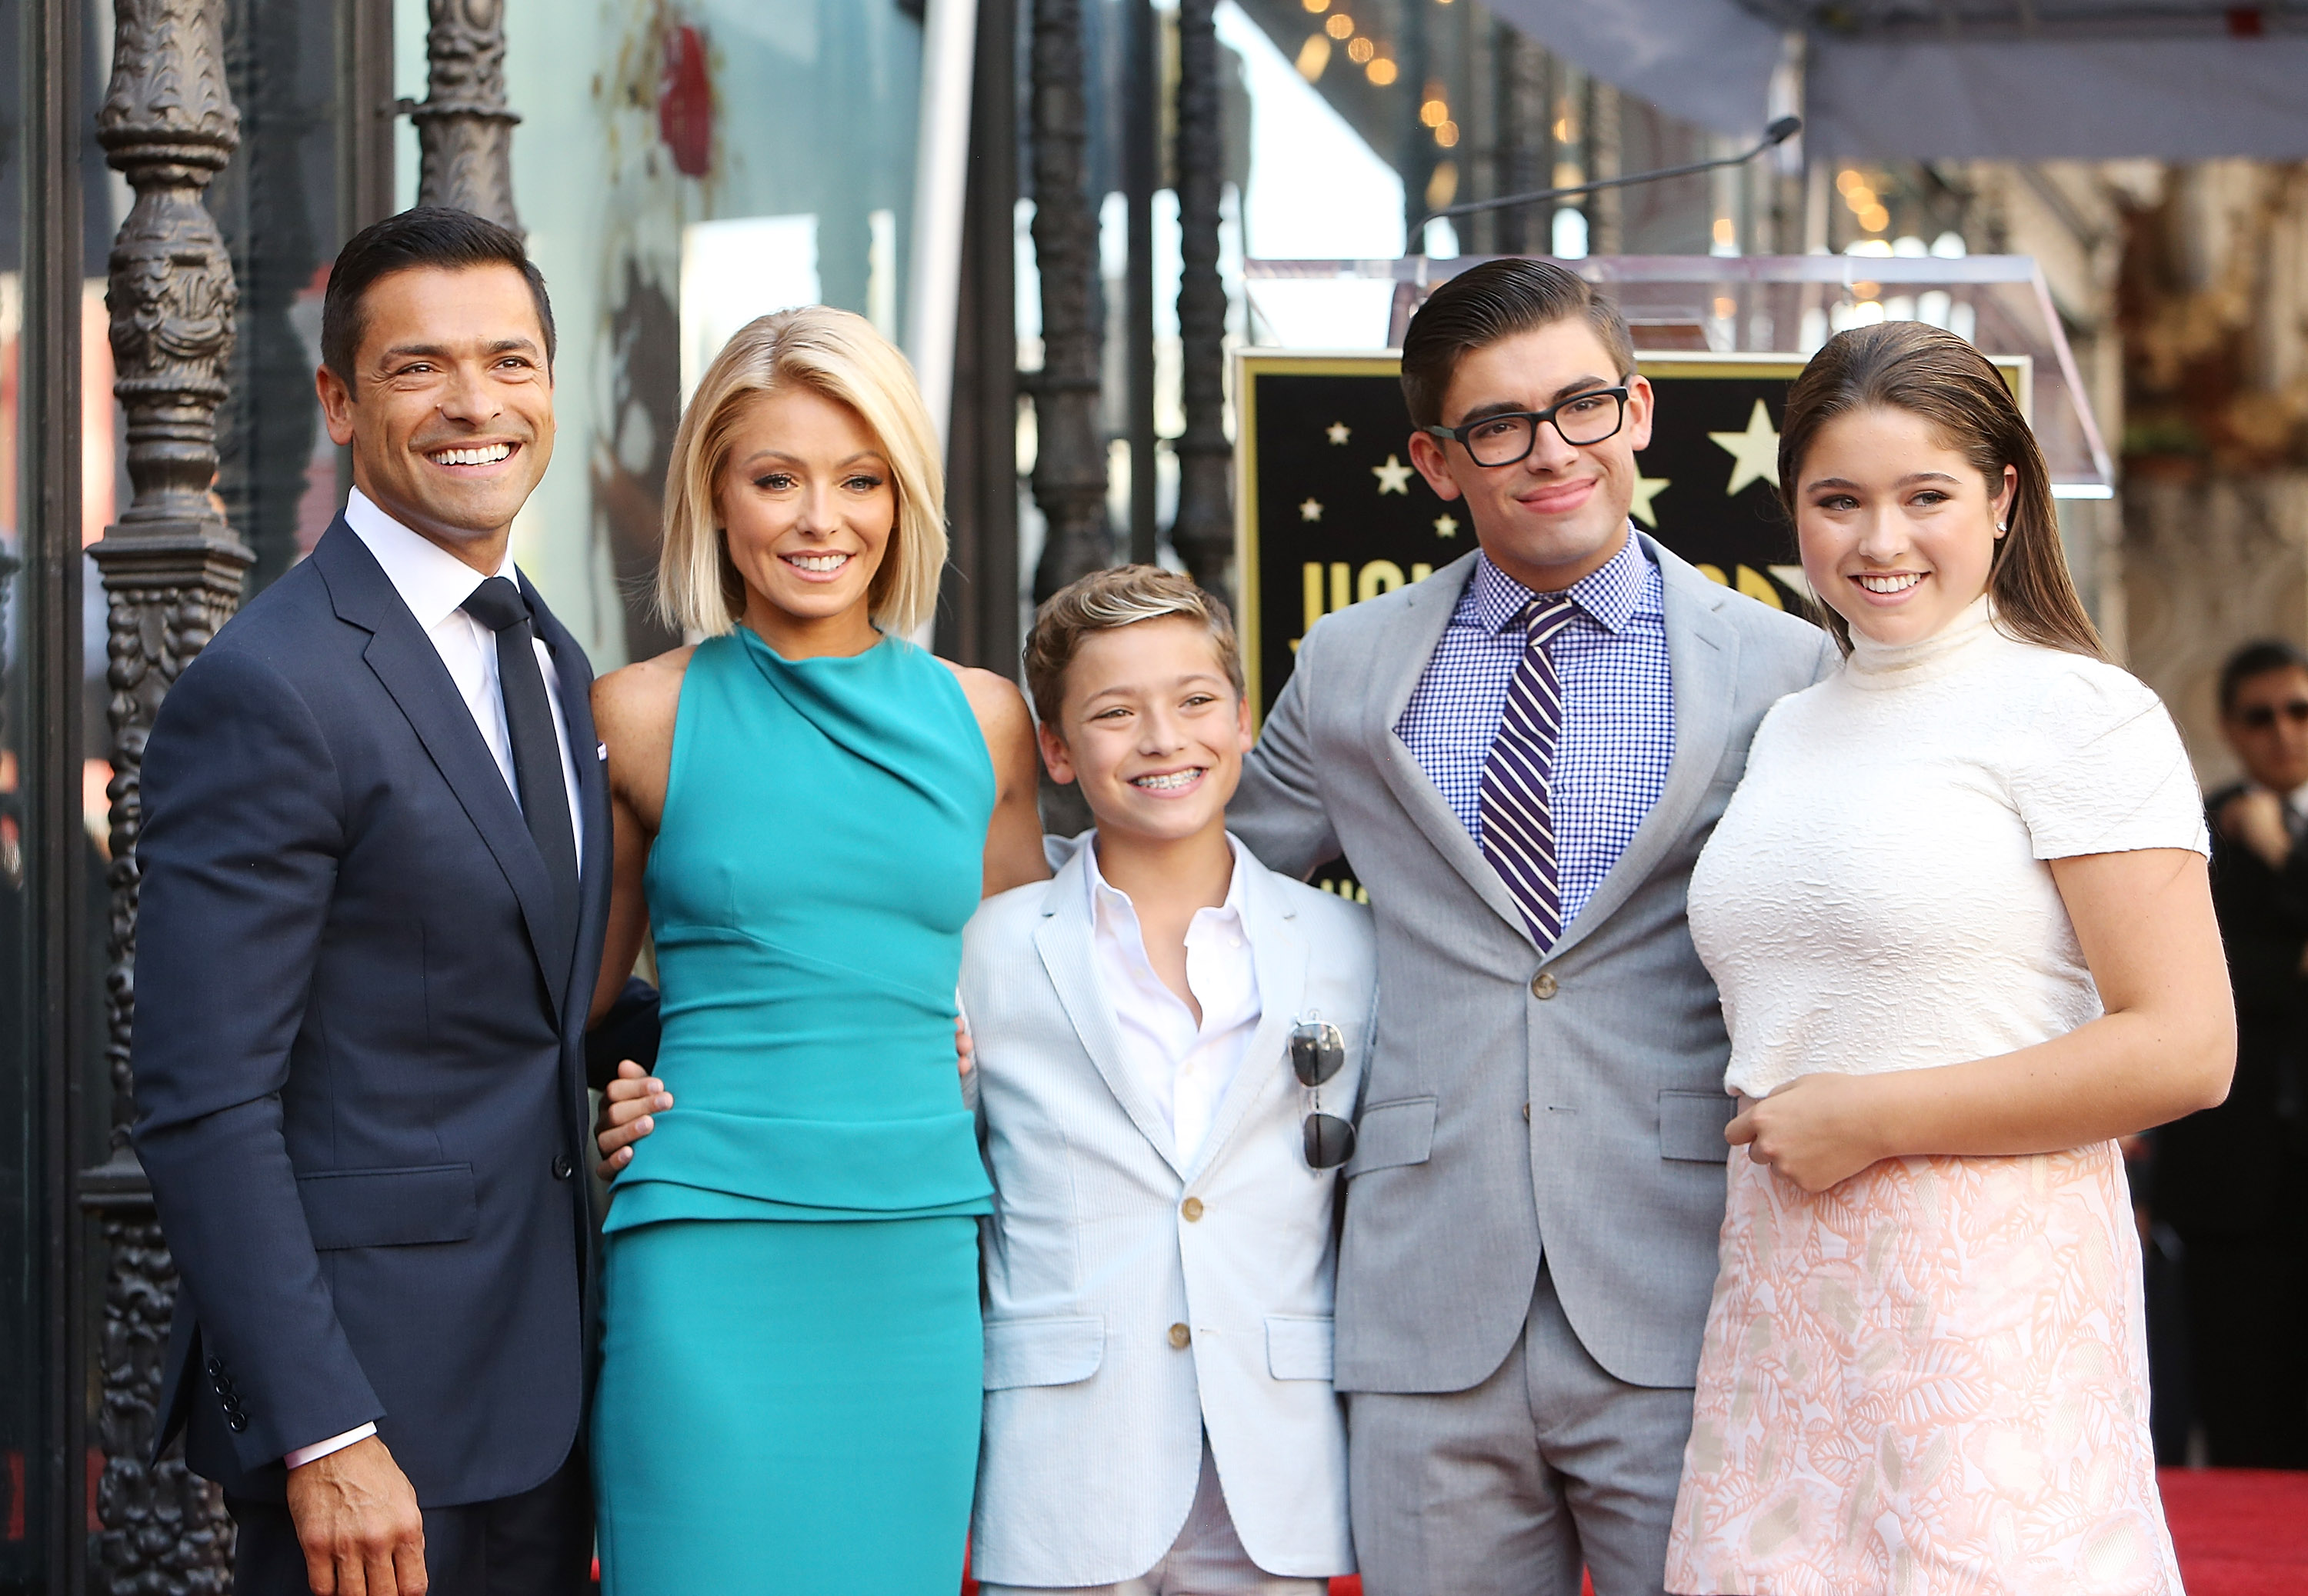 Kelly Ripa Shares Hilarious Tbt Photo Of Herself On Vacation With Her Kids